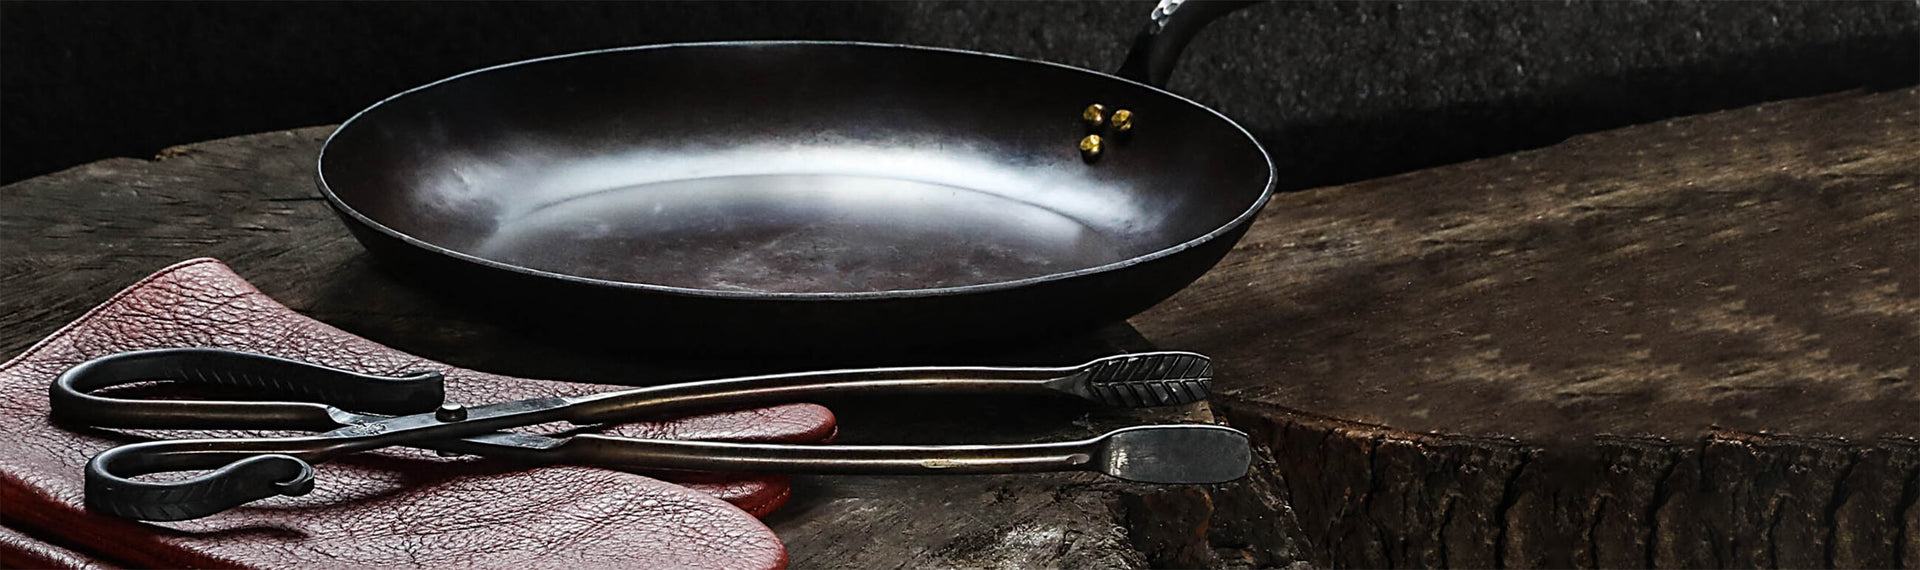 Medieval Hand Forged Outdoor Small Camping Folding Pan 